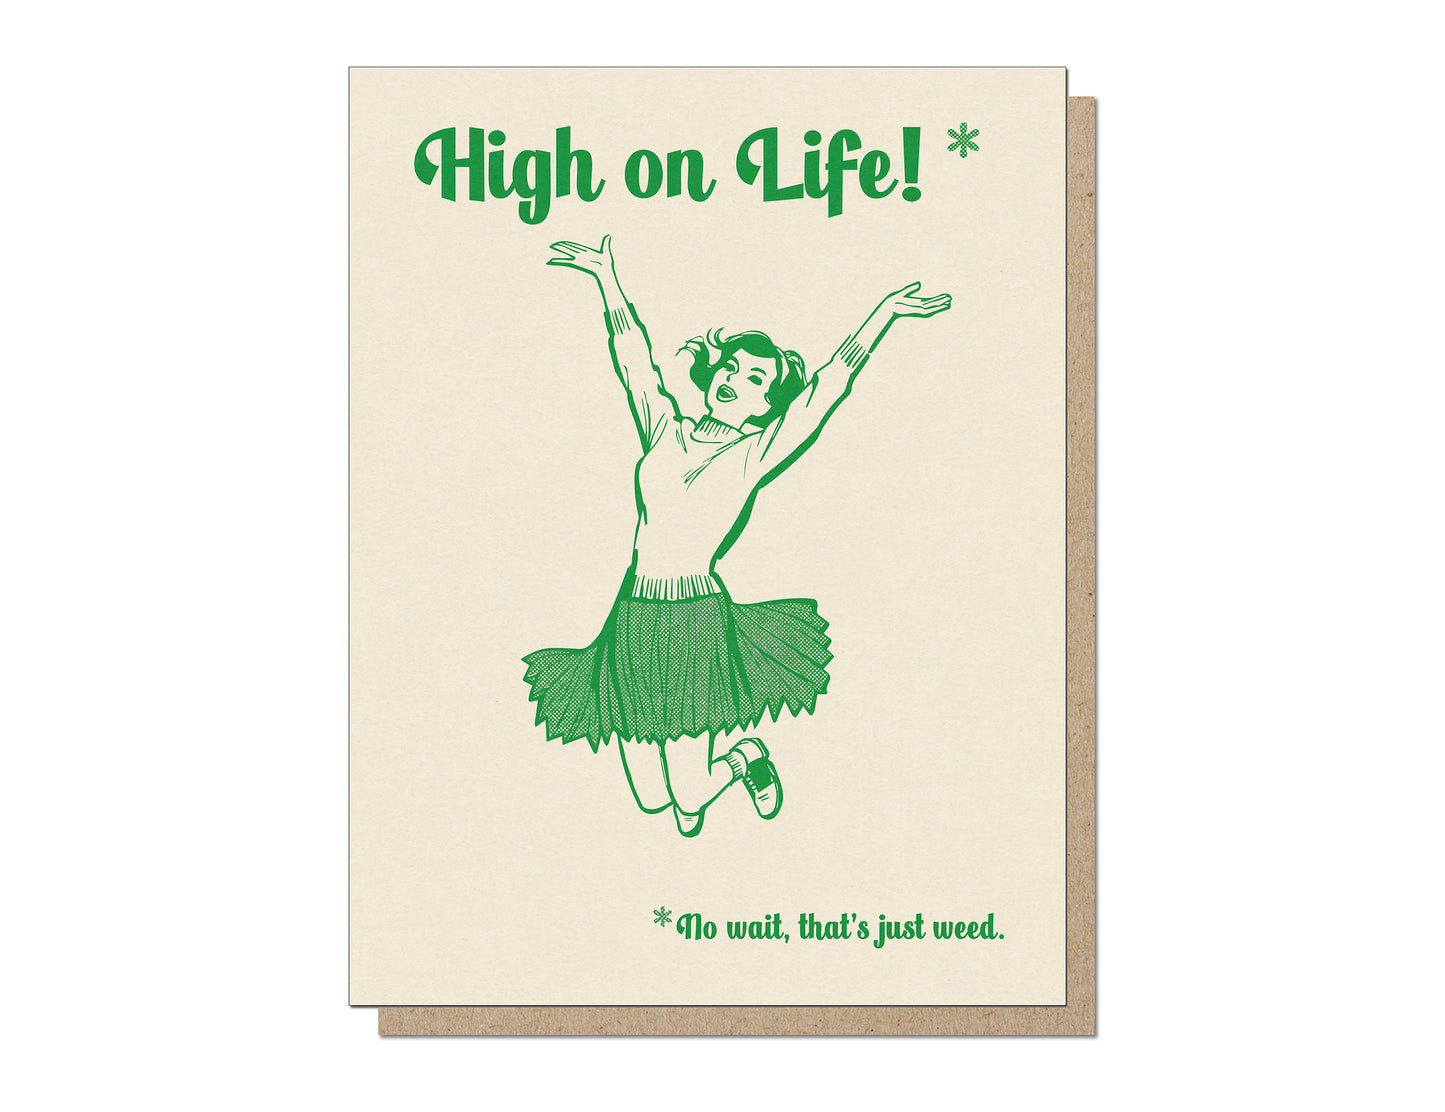 High on Life, No Wait that's just Weed. Funny Letterpress Greeting Card.